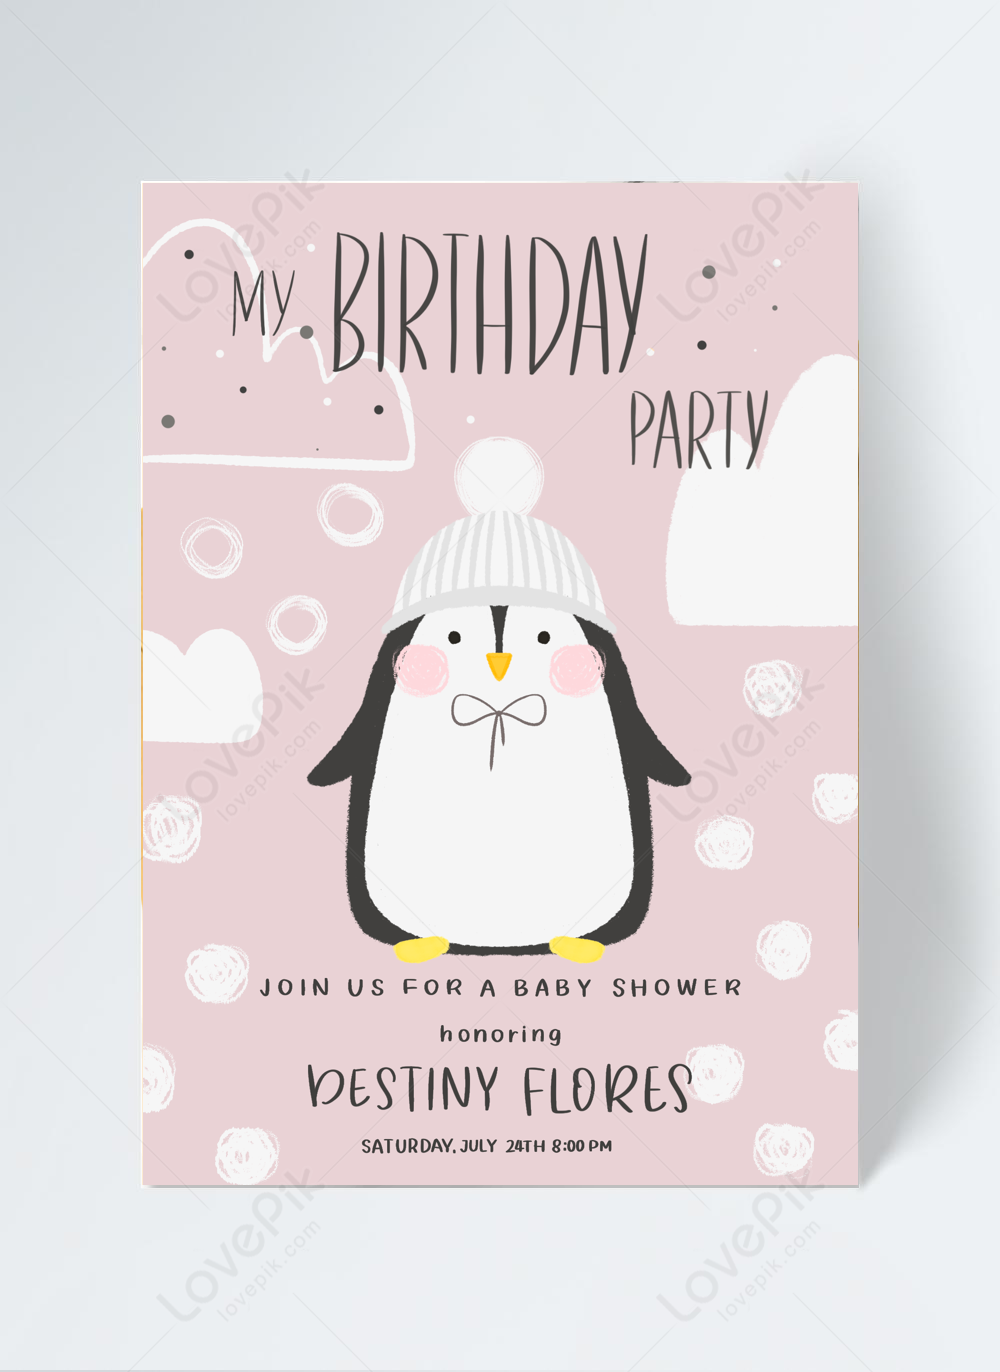 Pink Penguin Childrens Birthday Invitation Template Image Picture Free Download 465479348 Lovepik Com